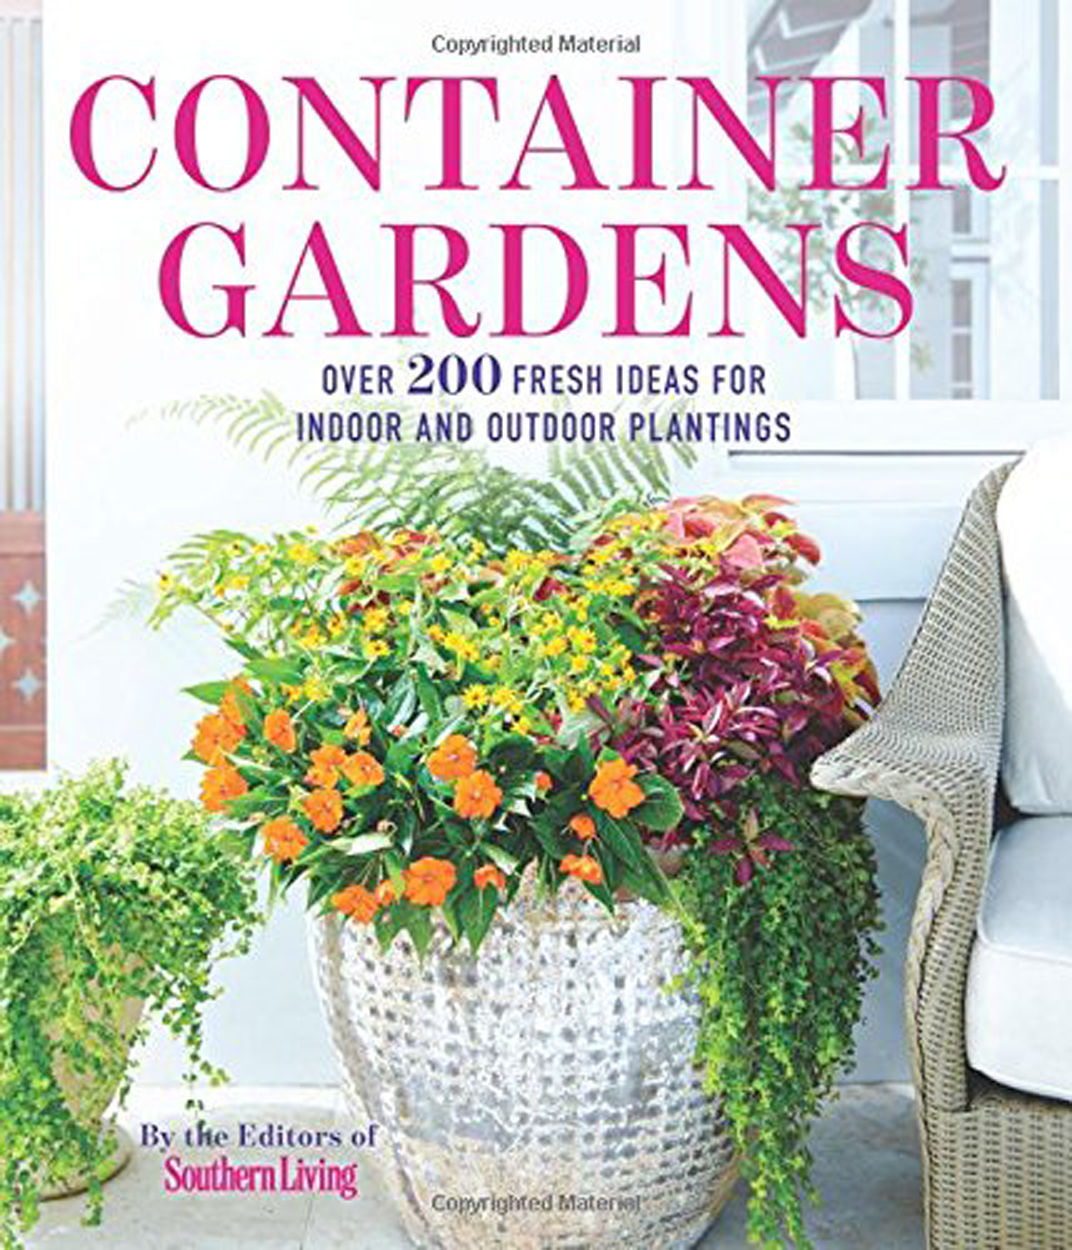 Book Offers Fresh Ideas For Planting Container Gardens Growing